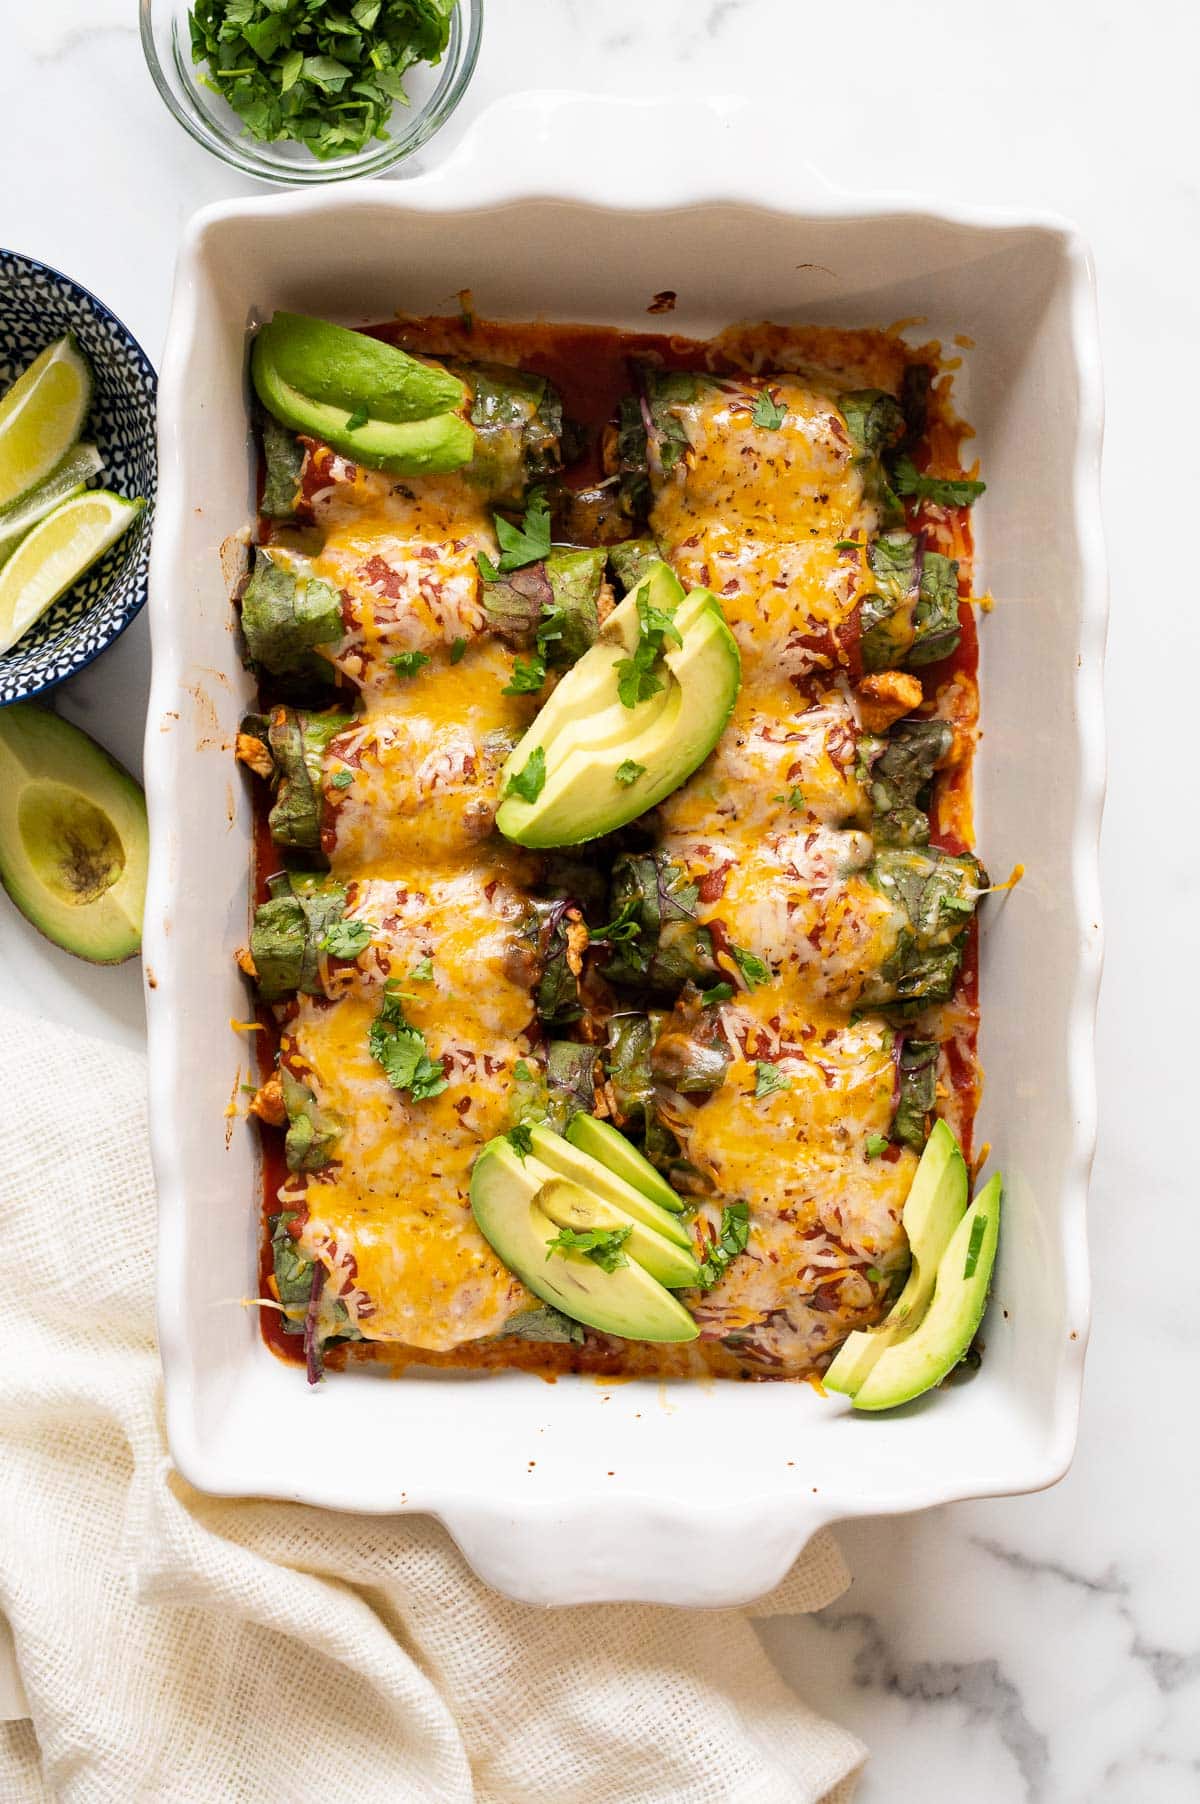 Low carb chicken enchiladas with cheese on top served in a baking dish with slices of avocado and cilantro. More avocado and lime on a side.